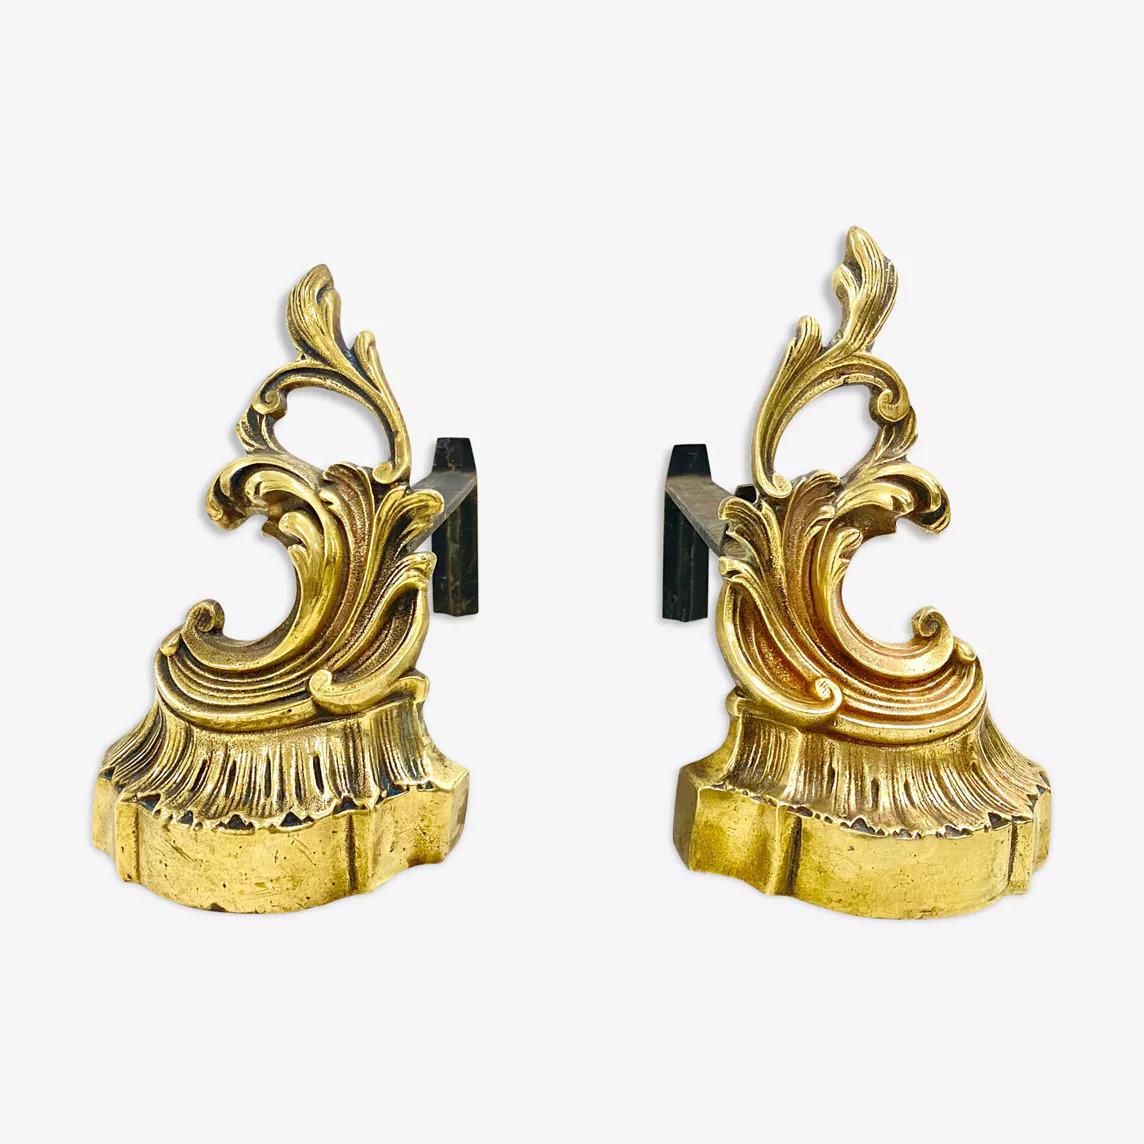 Pair of antique andirons made of gilt bronze decorated with large acanthus leaves. Dimensions 12 width x 37 length x 19 height.
LP29